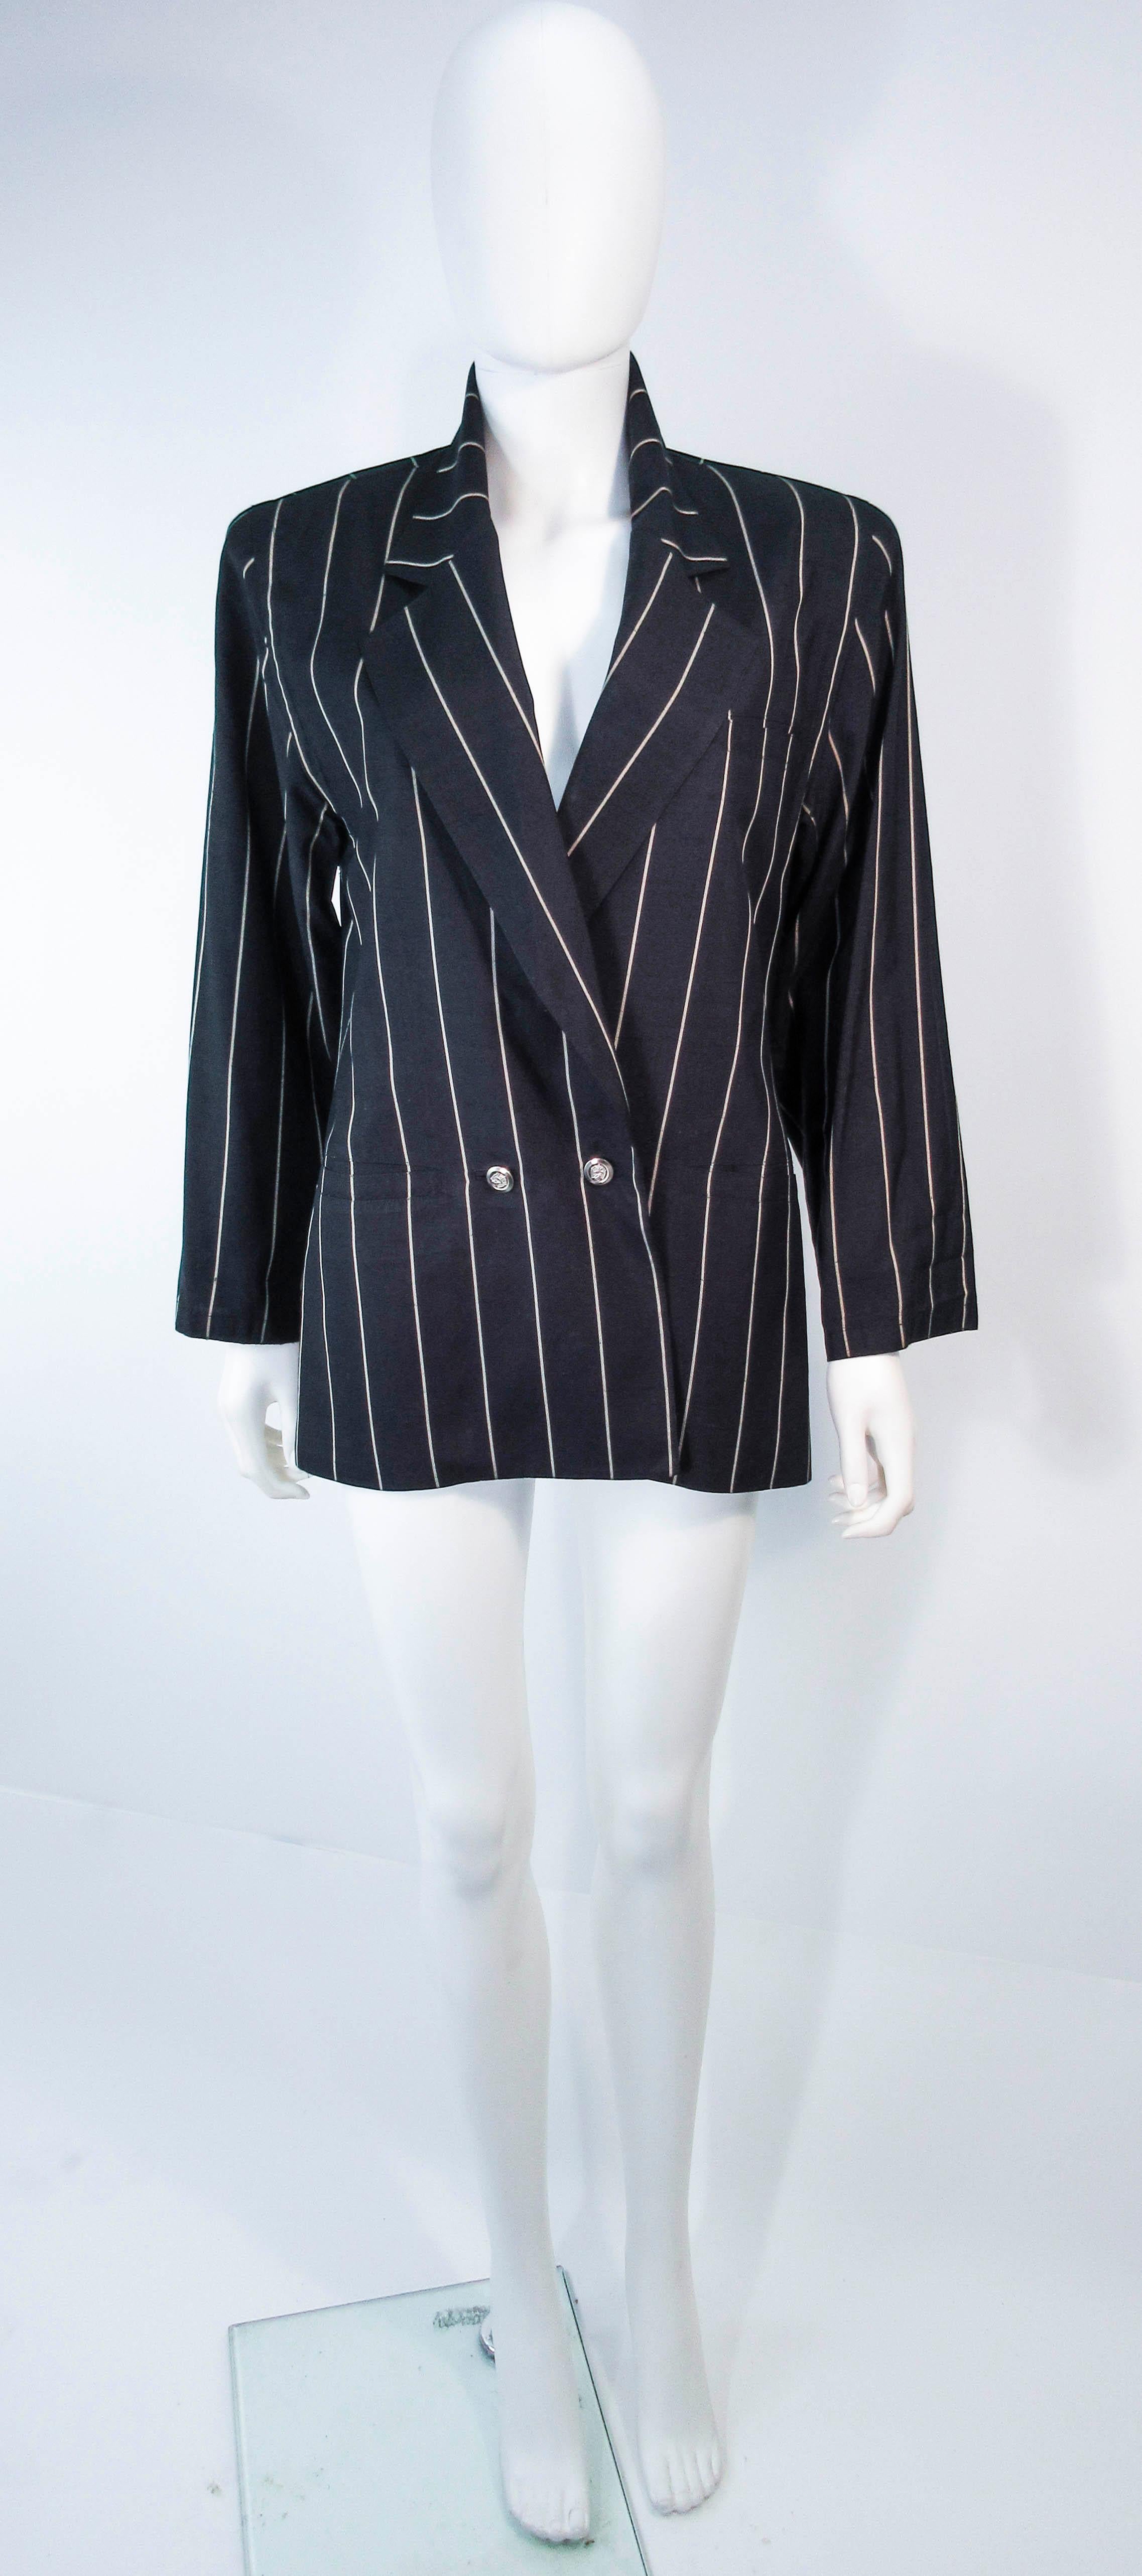 This vintage Versace coat is composed of a light weight black & cream striped textile. Features a center front button closure & pockets. In excellent vintage pre-owned condition, some wear (see photos). 

**Please cross-reference measurements for